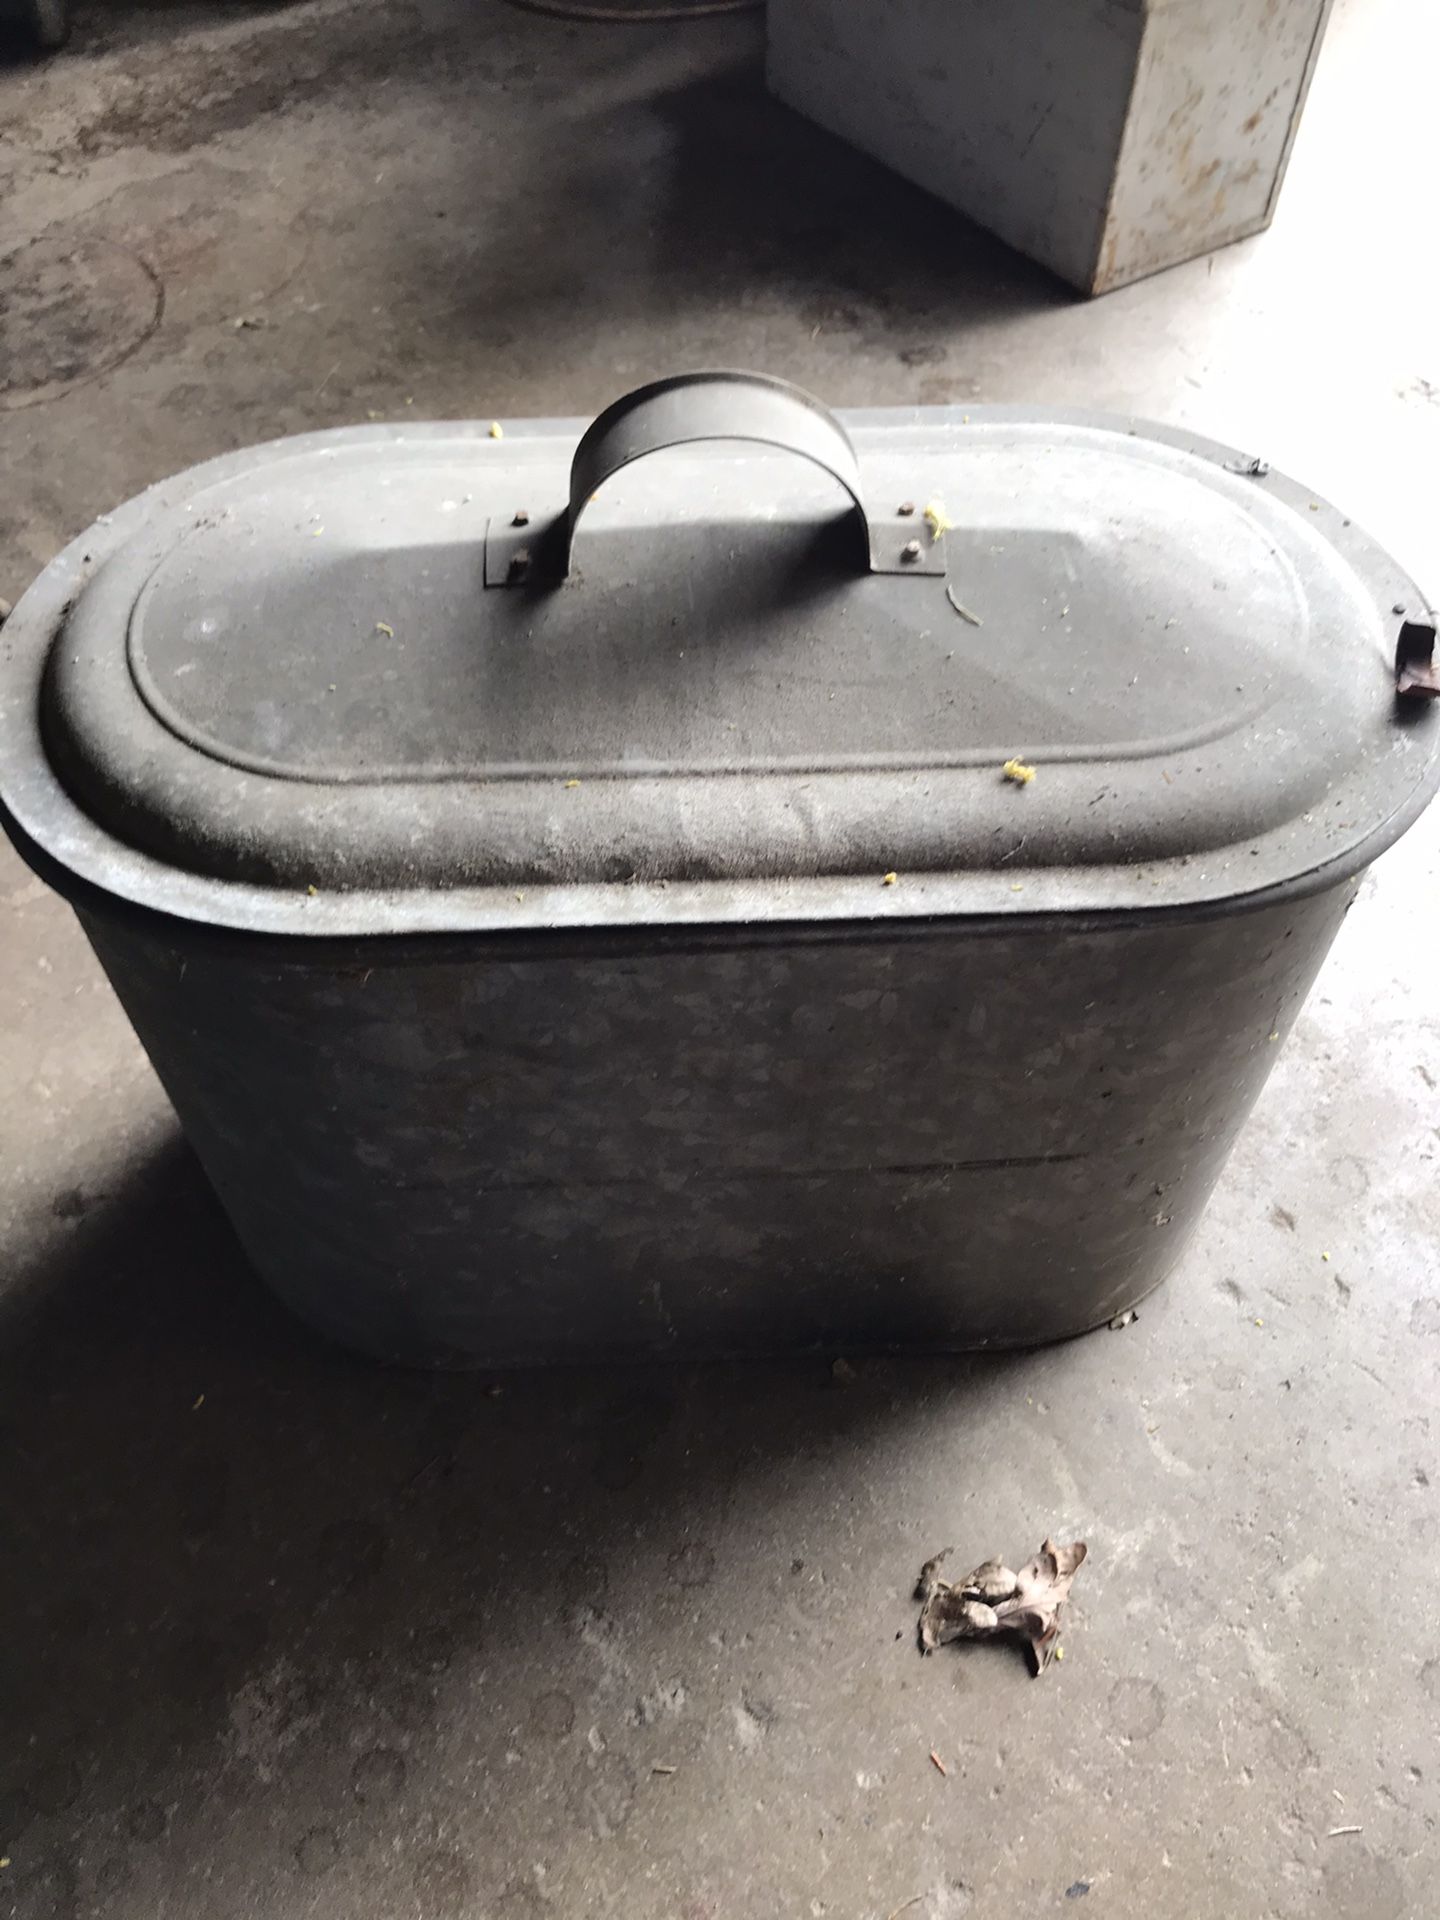 Antique wash tub with bottle holders